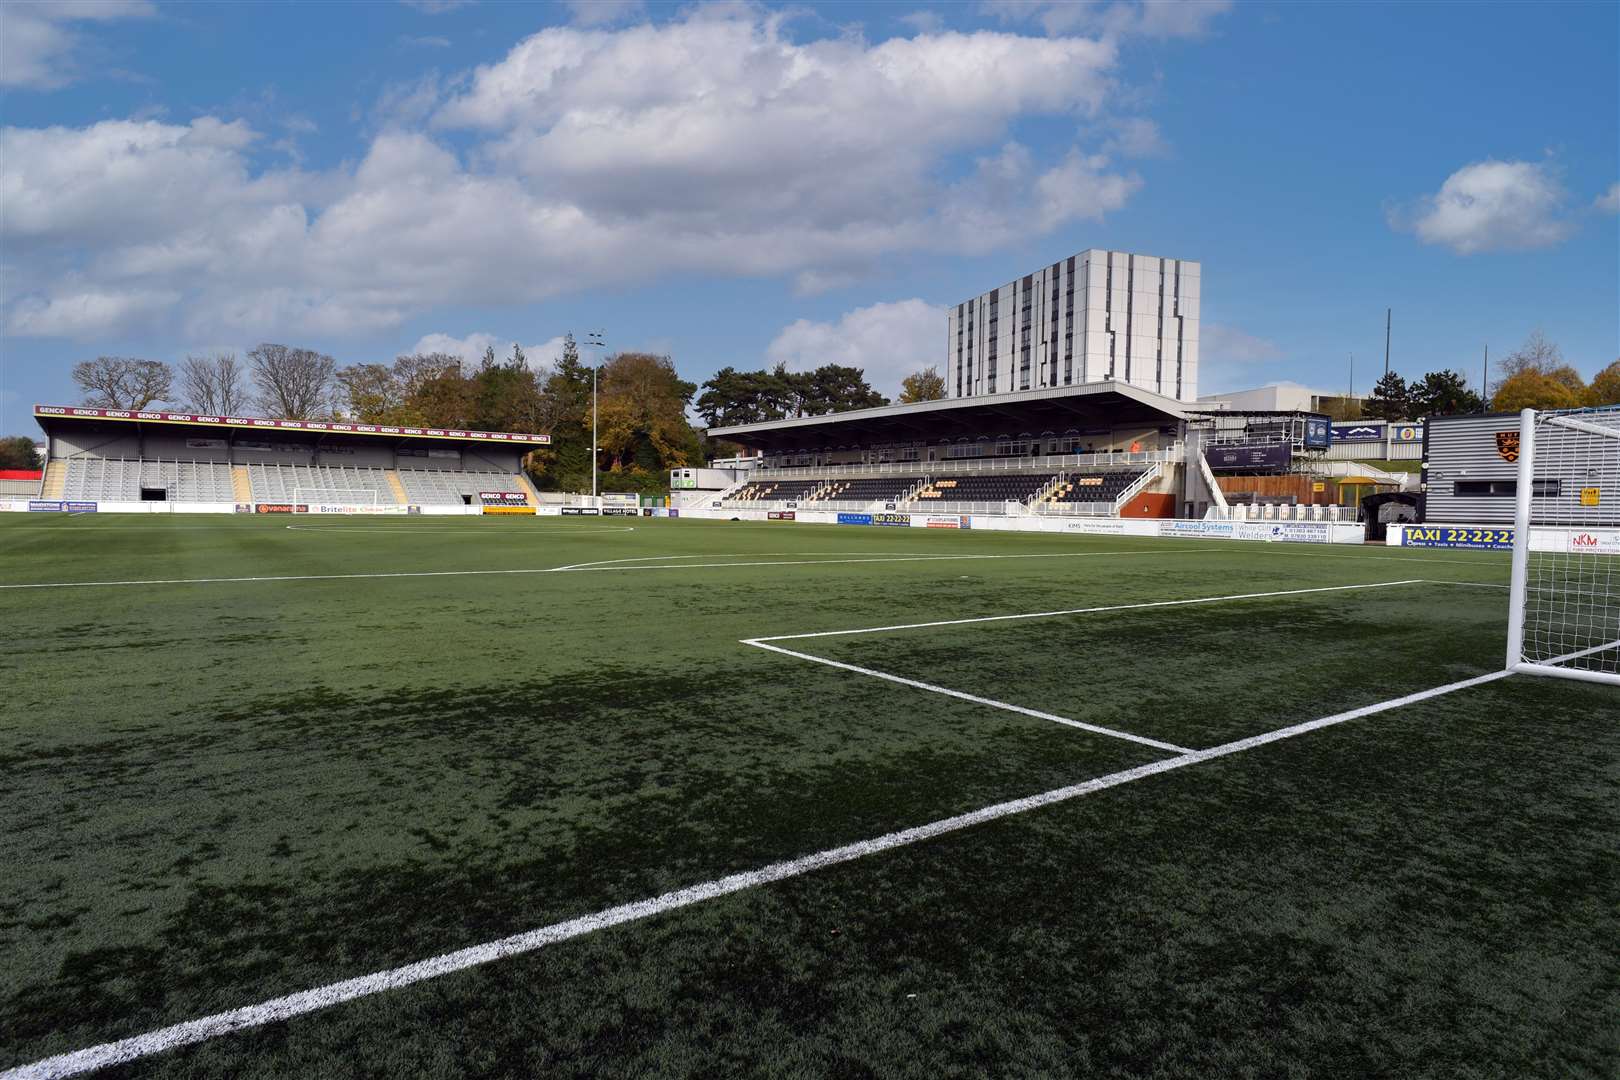 A charity match will be held on Saturday, April 15, at the Gallagher Stadium in Maidstone